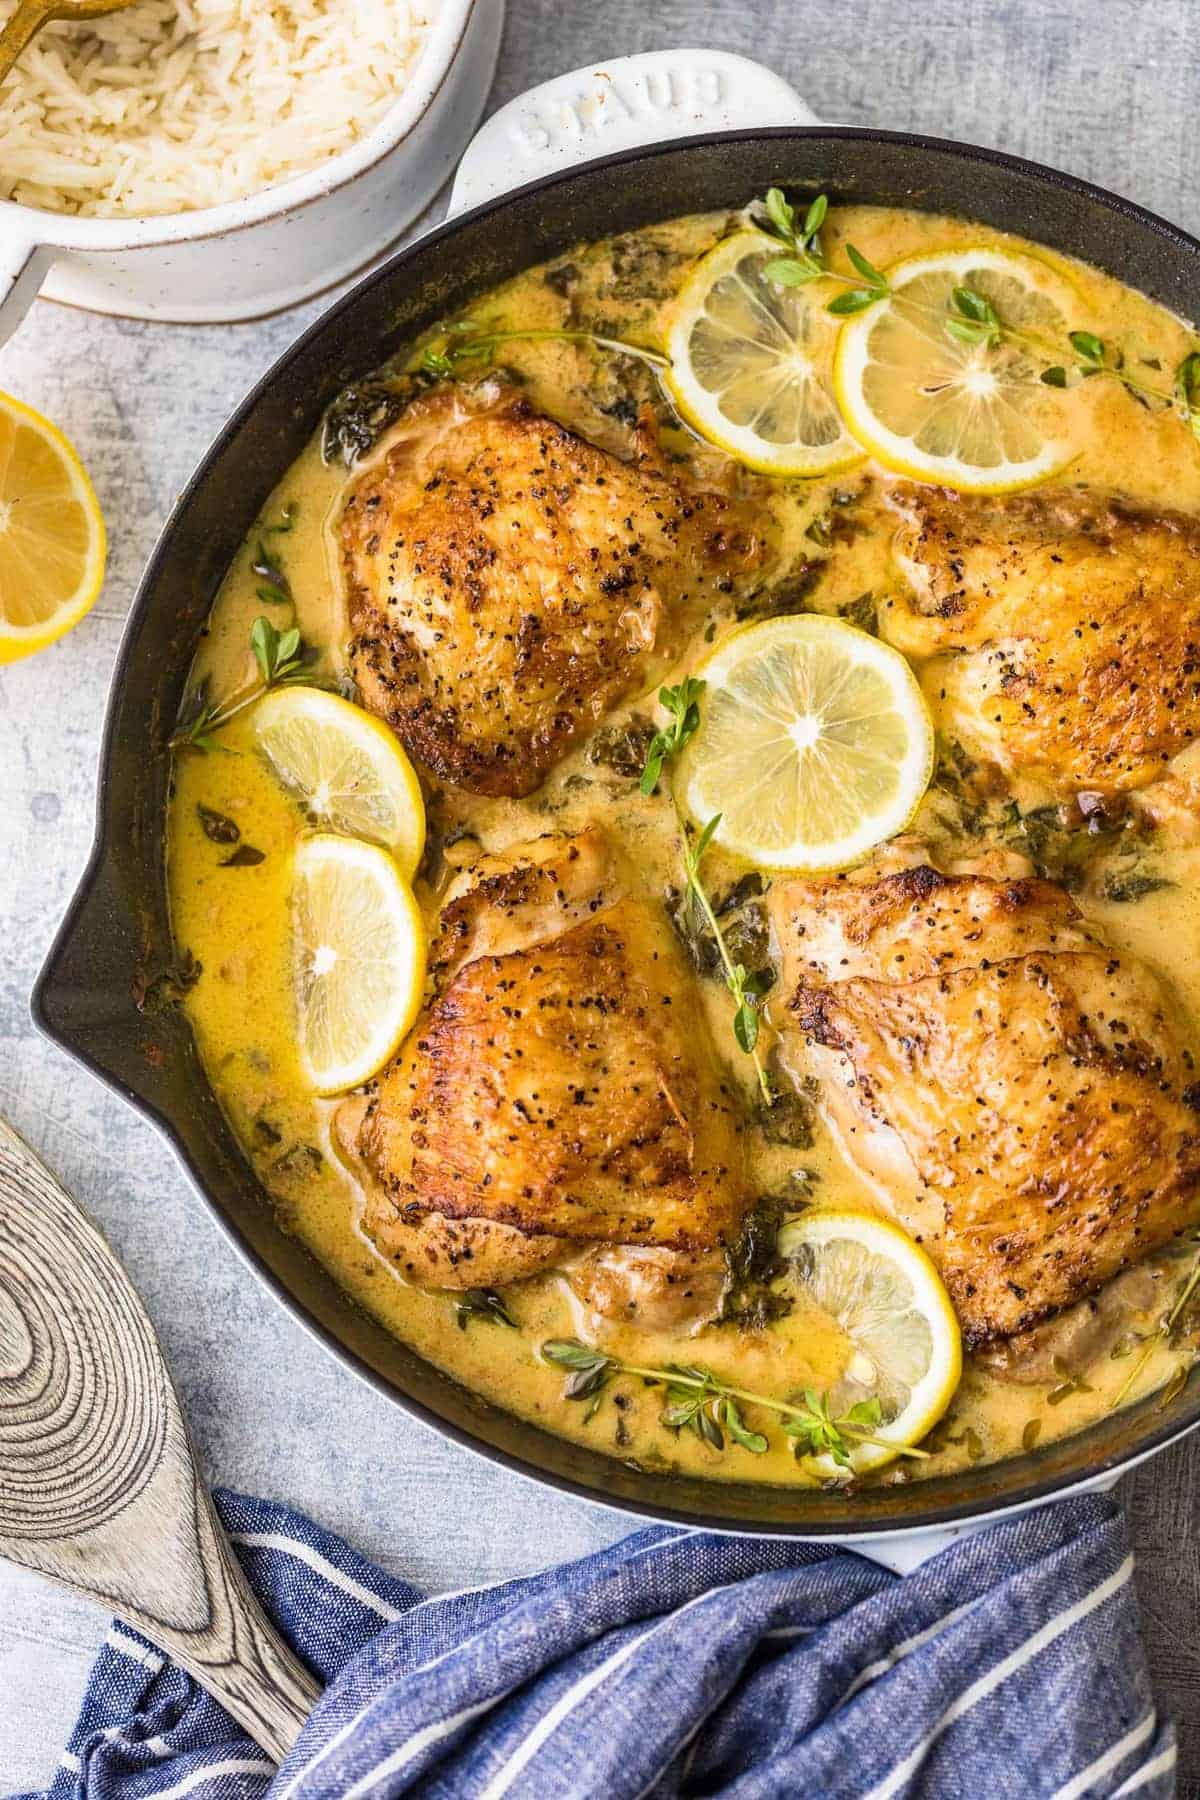 Lemon Butter Chicken Recipe Creamy Easy Chicken Recipes Video,Places To Have A Birthday Party For Adults Near Me